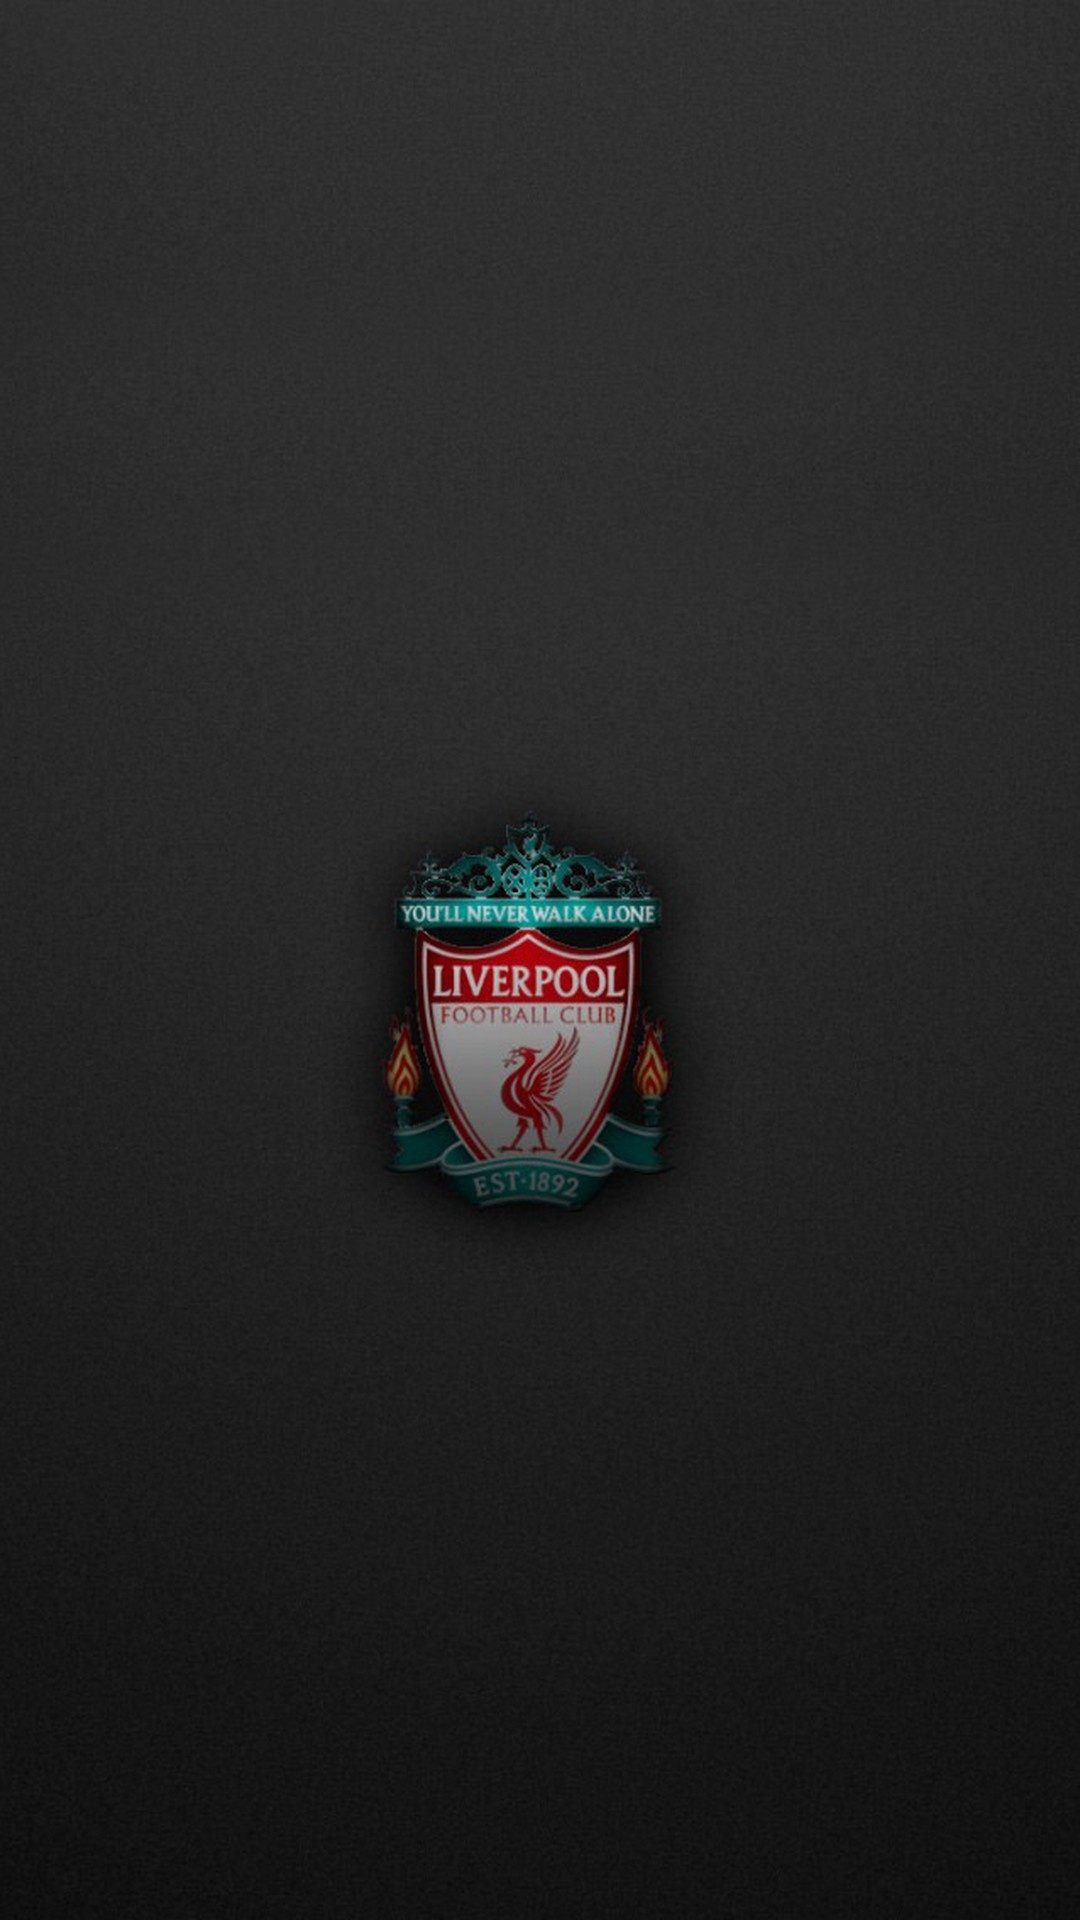 Liverpool Football Club: The crest incorporates the Liver bird, a banner reading You'll Never Walk Alone. 1080x1920 Full HD Background.